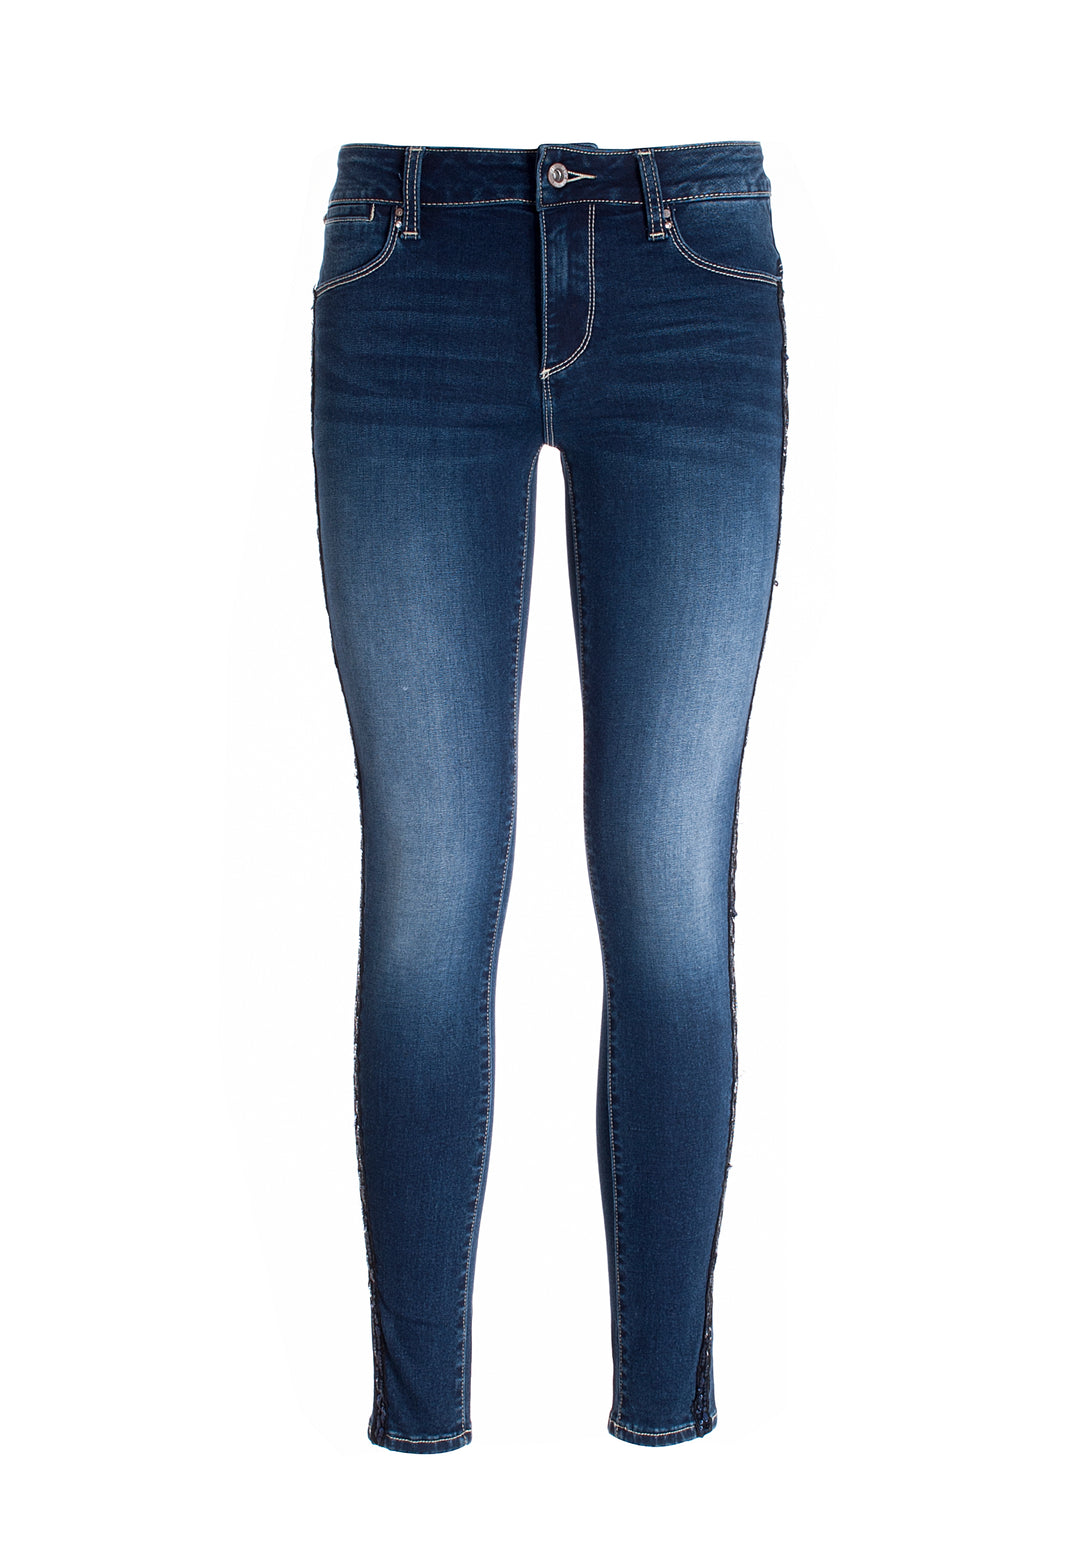 Jeans skinny fit with push-up effect made in stretch denim with middle wash Fracomina FP21WV1002D40901-B30